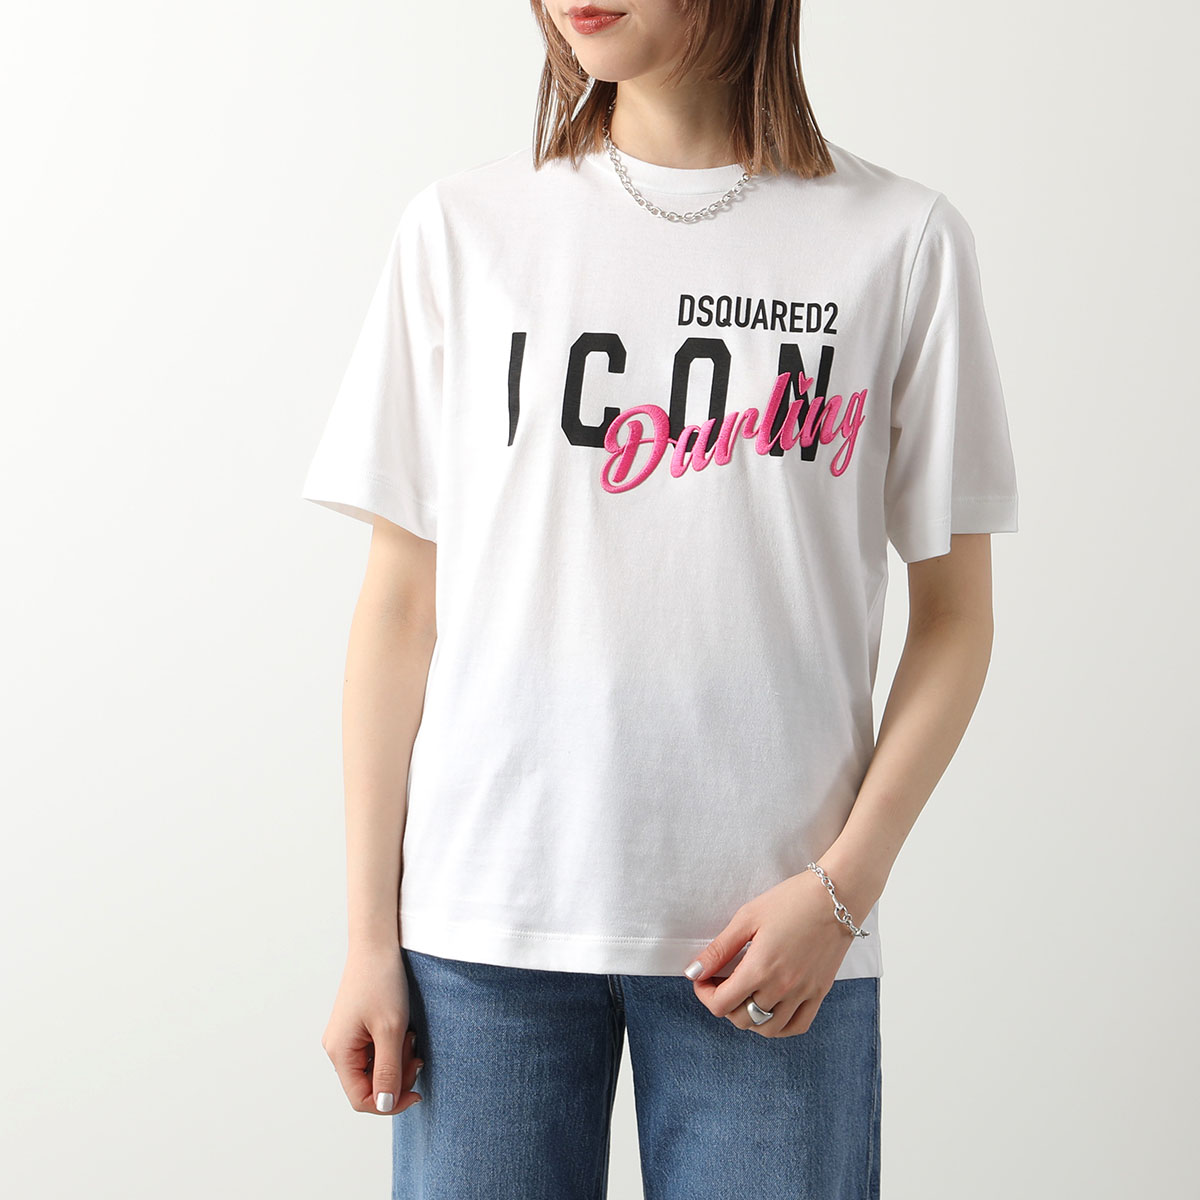 DSQUARED2 ディースクエアード Tシャツ ICON DARLING EASY FIT T-S...